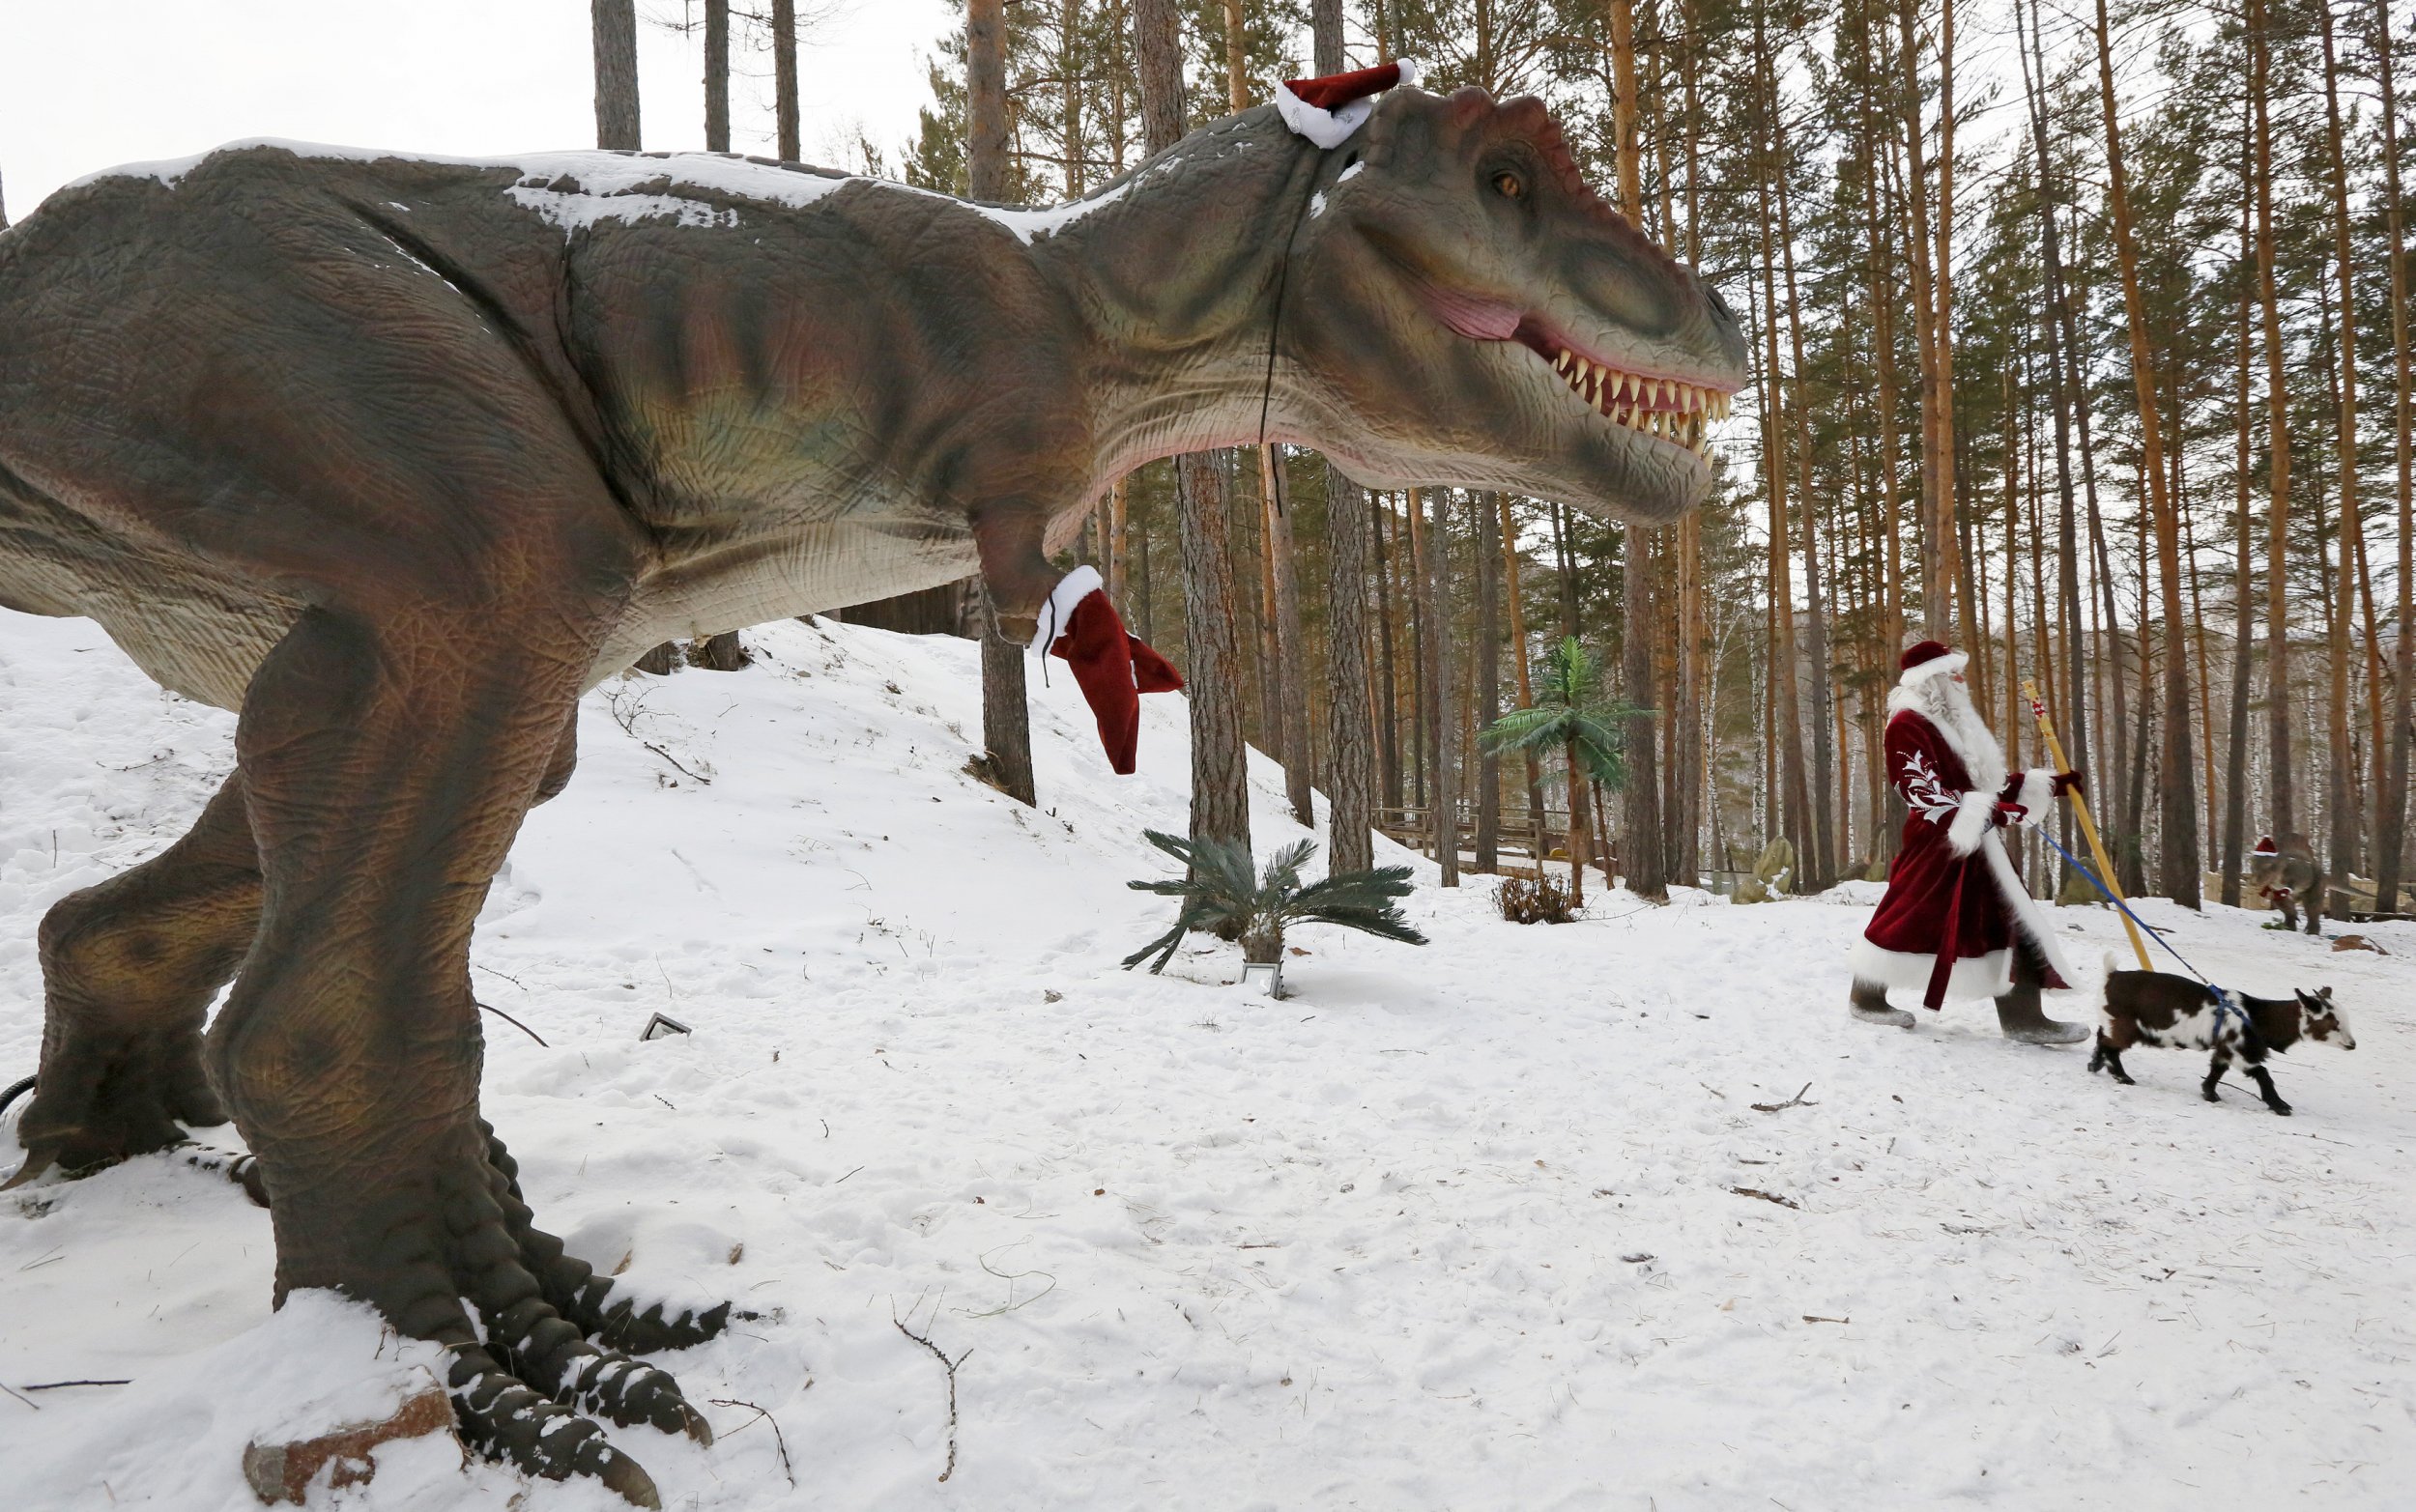 Russian Church Authority Suggests Dinosaurs Lived With Humans - 